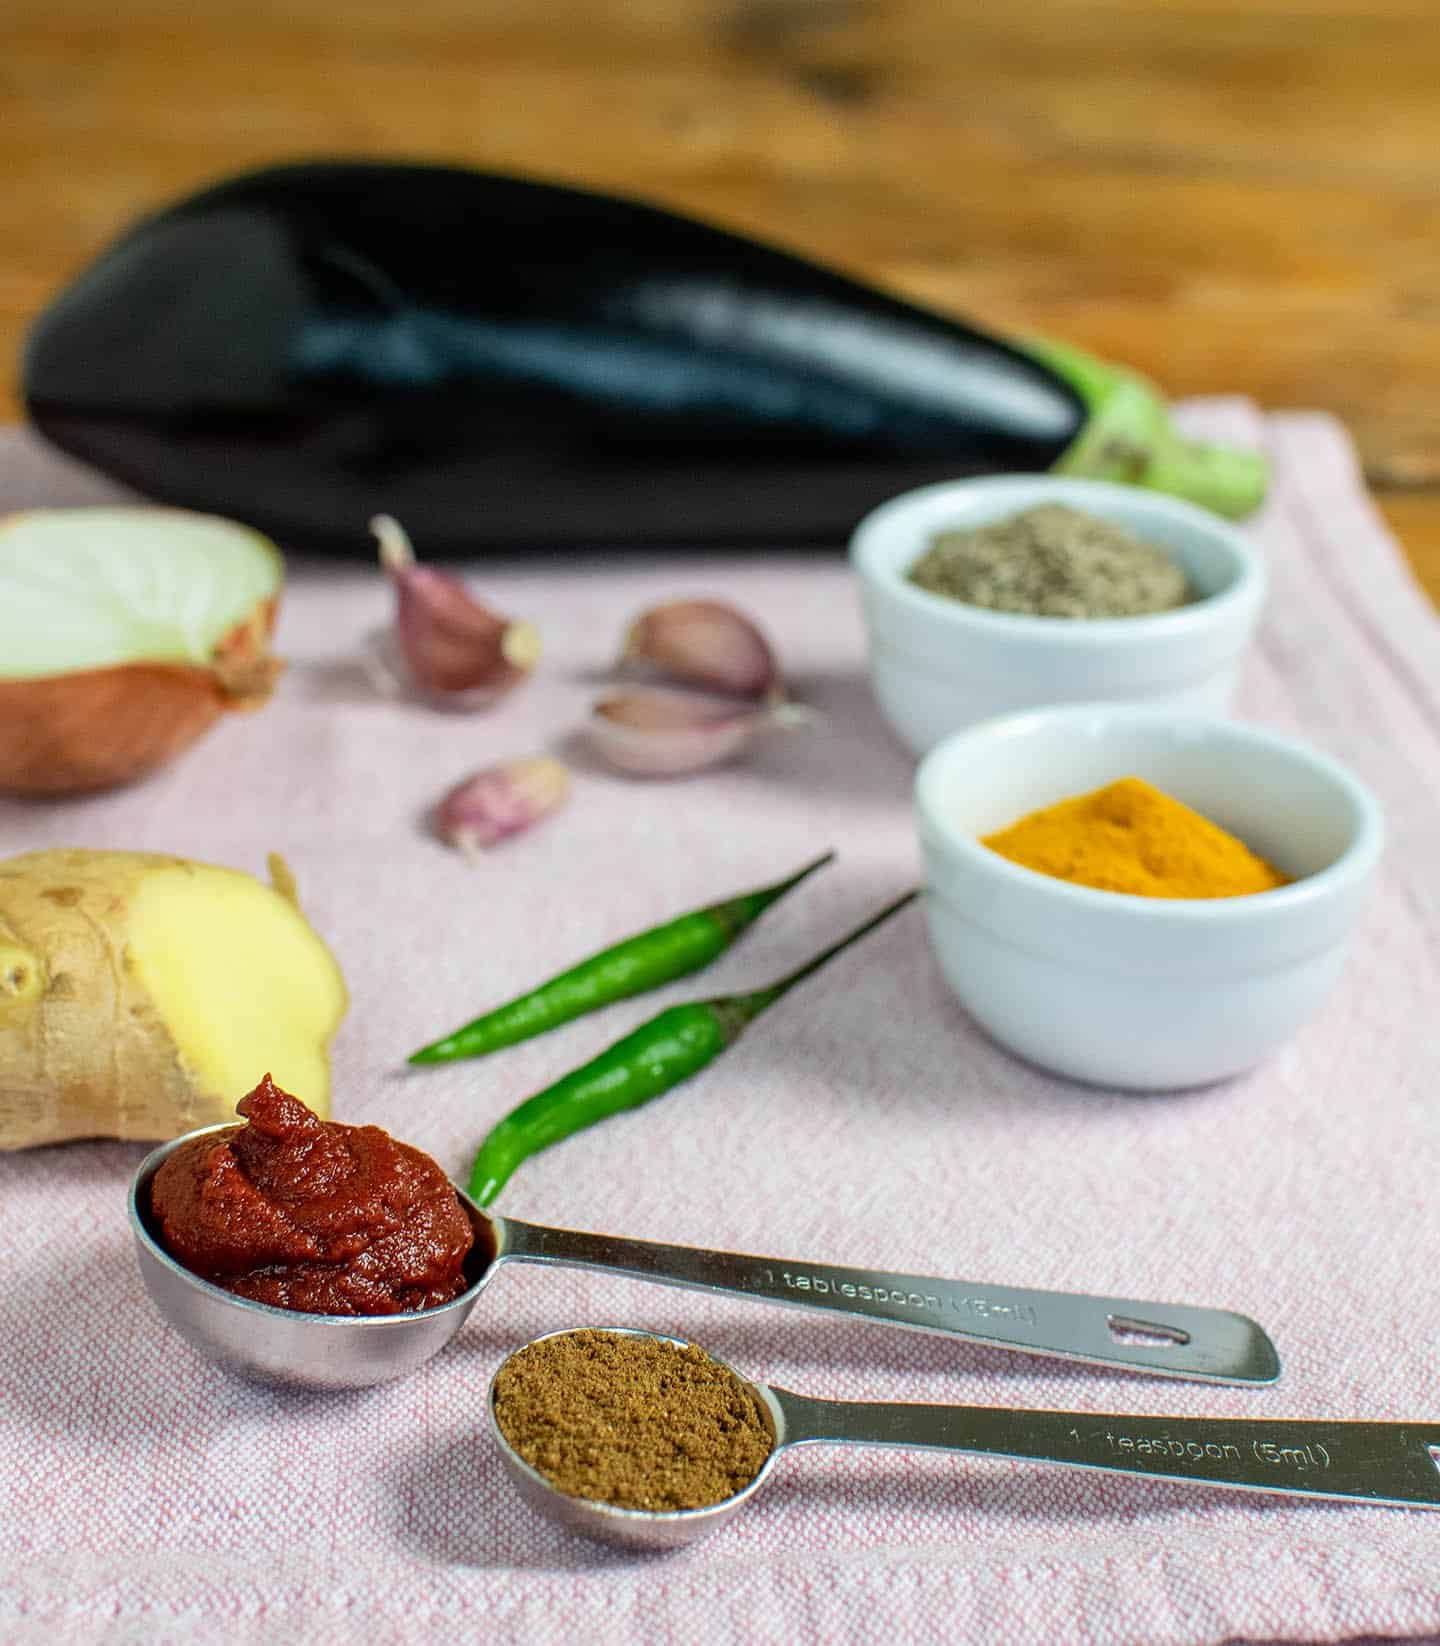 Ingredients laid out on a pink tea towel. It shows chillies, spices, ginger, aubergine and tomato puree